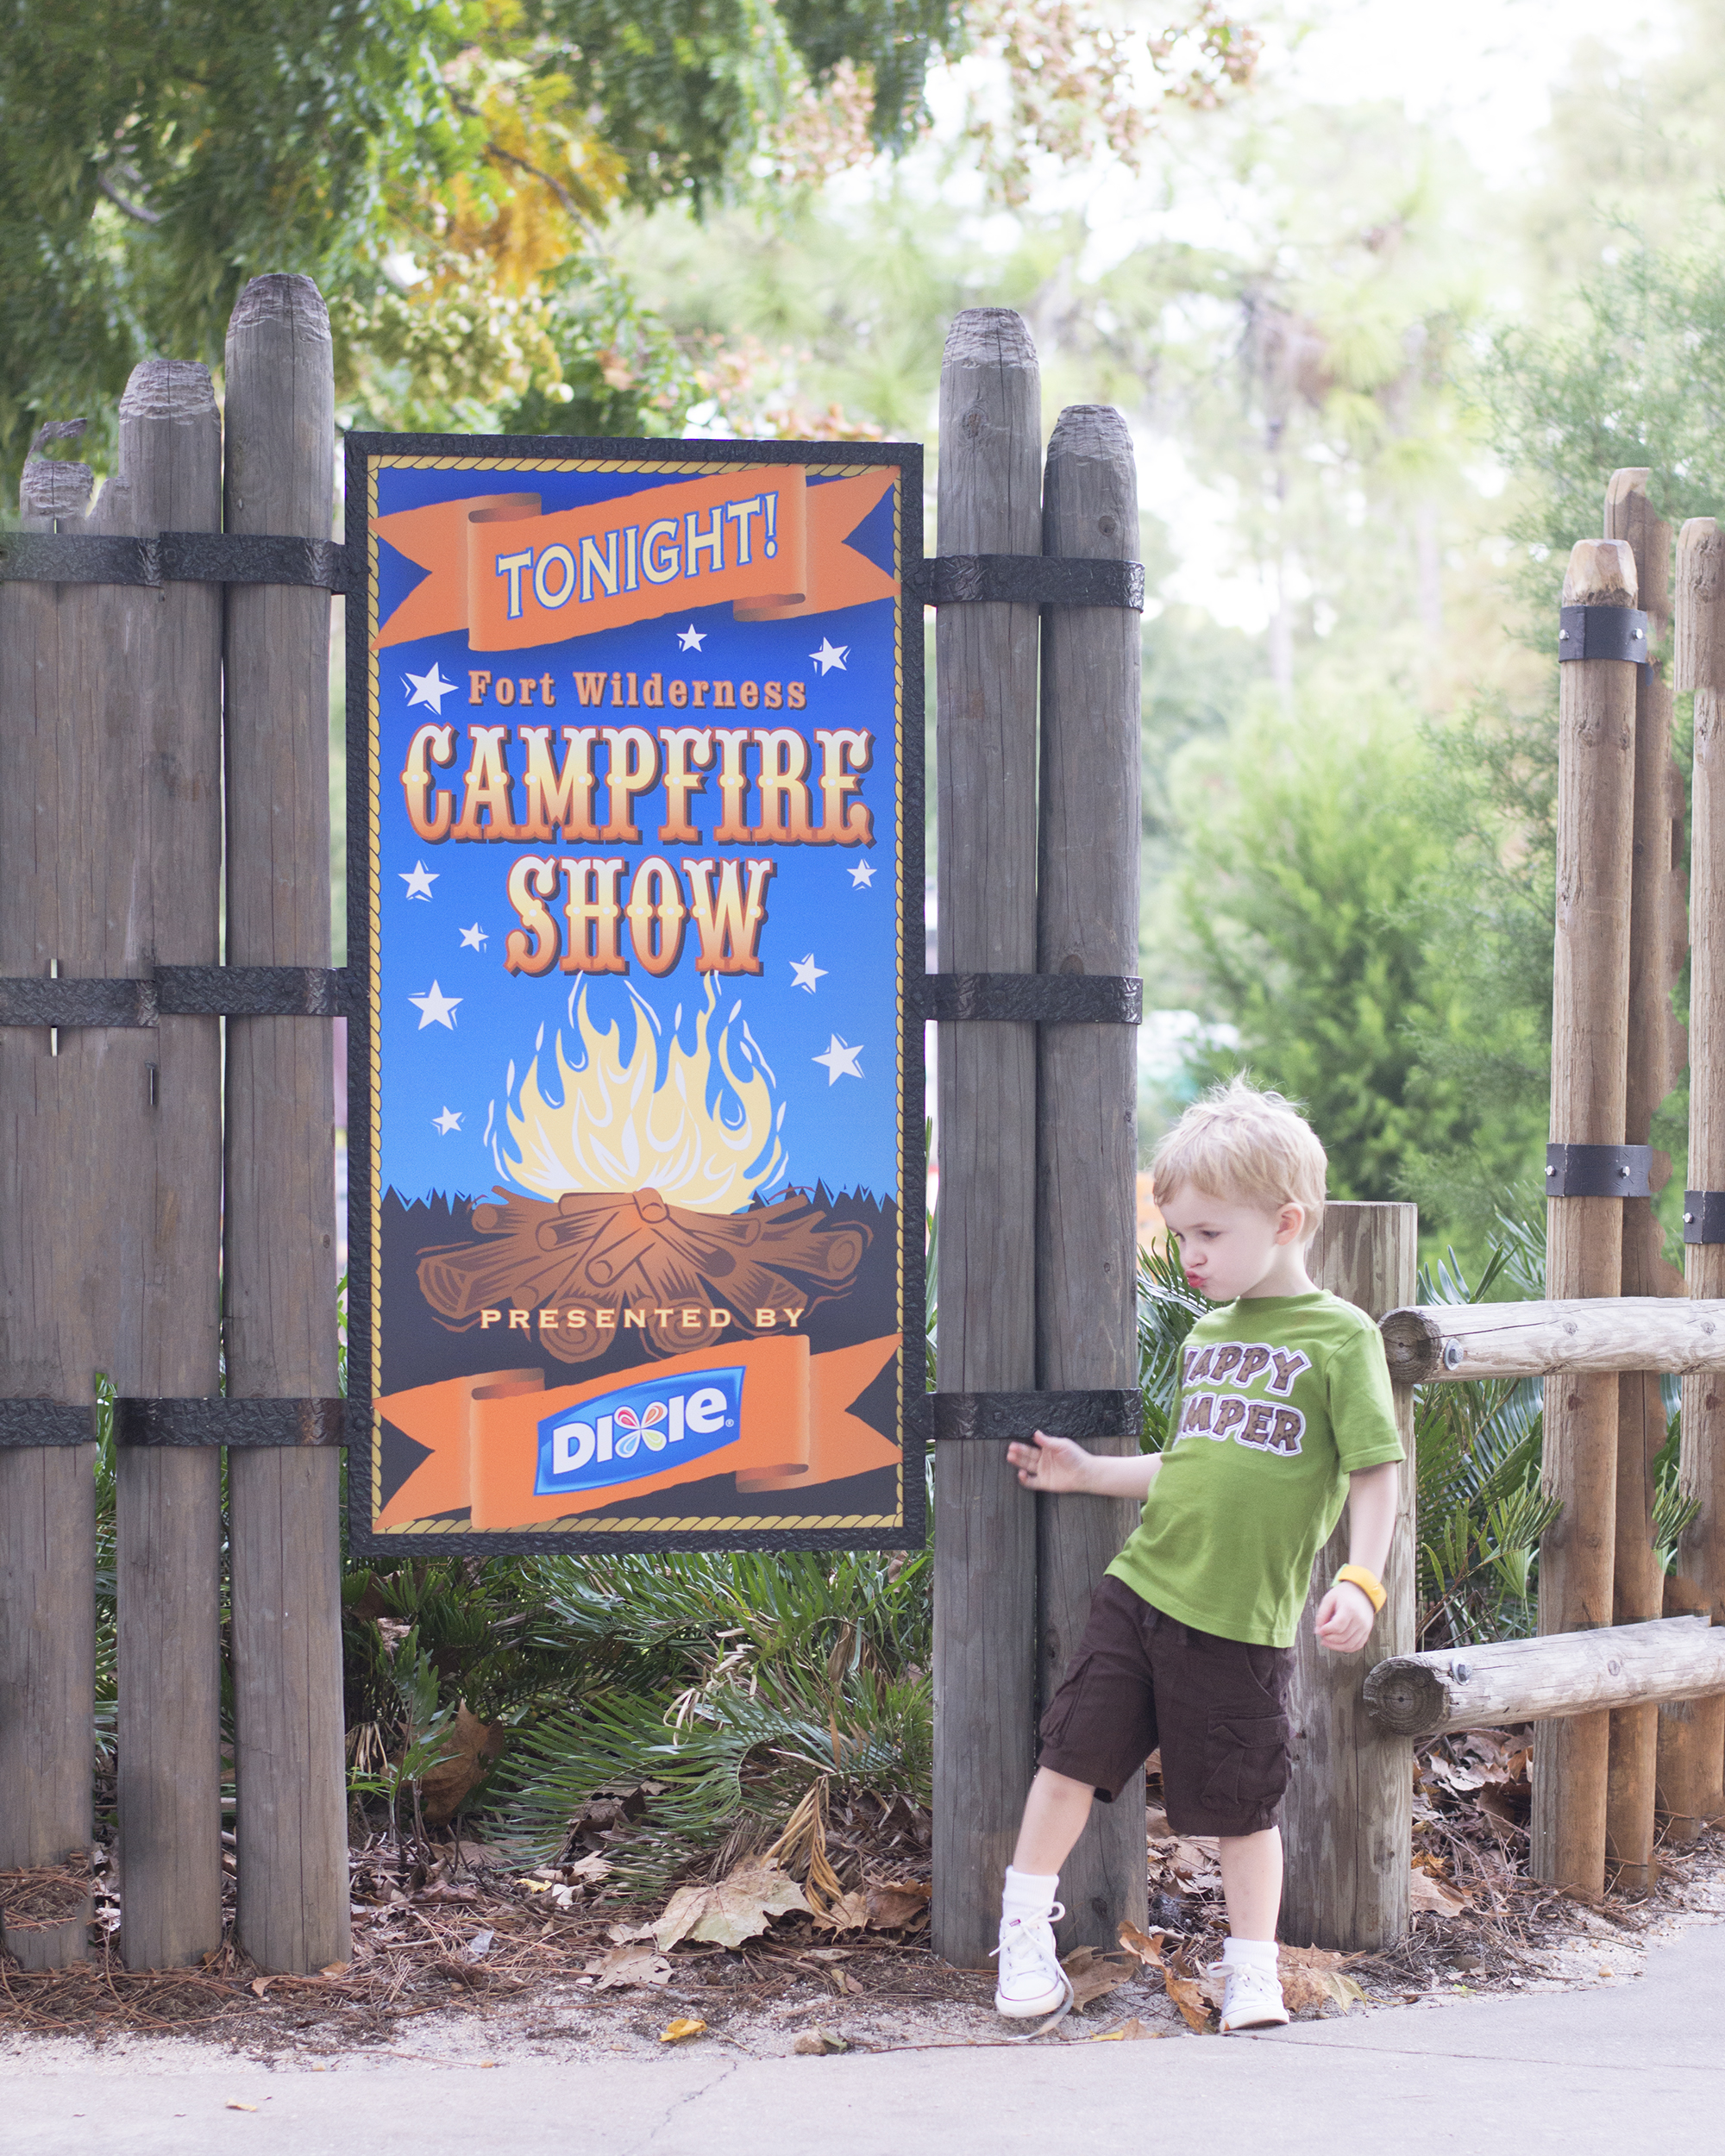 CHIP ‘N’ DALE’S CAMPFIRE SING-A-LONG – WITH THE HEADLESS HORSEMAN